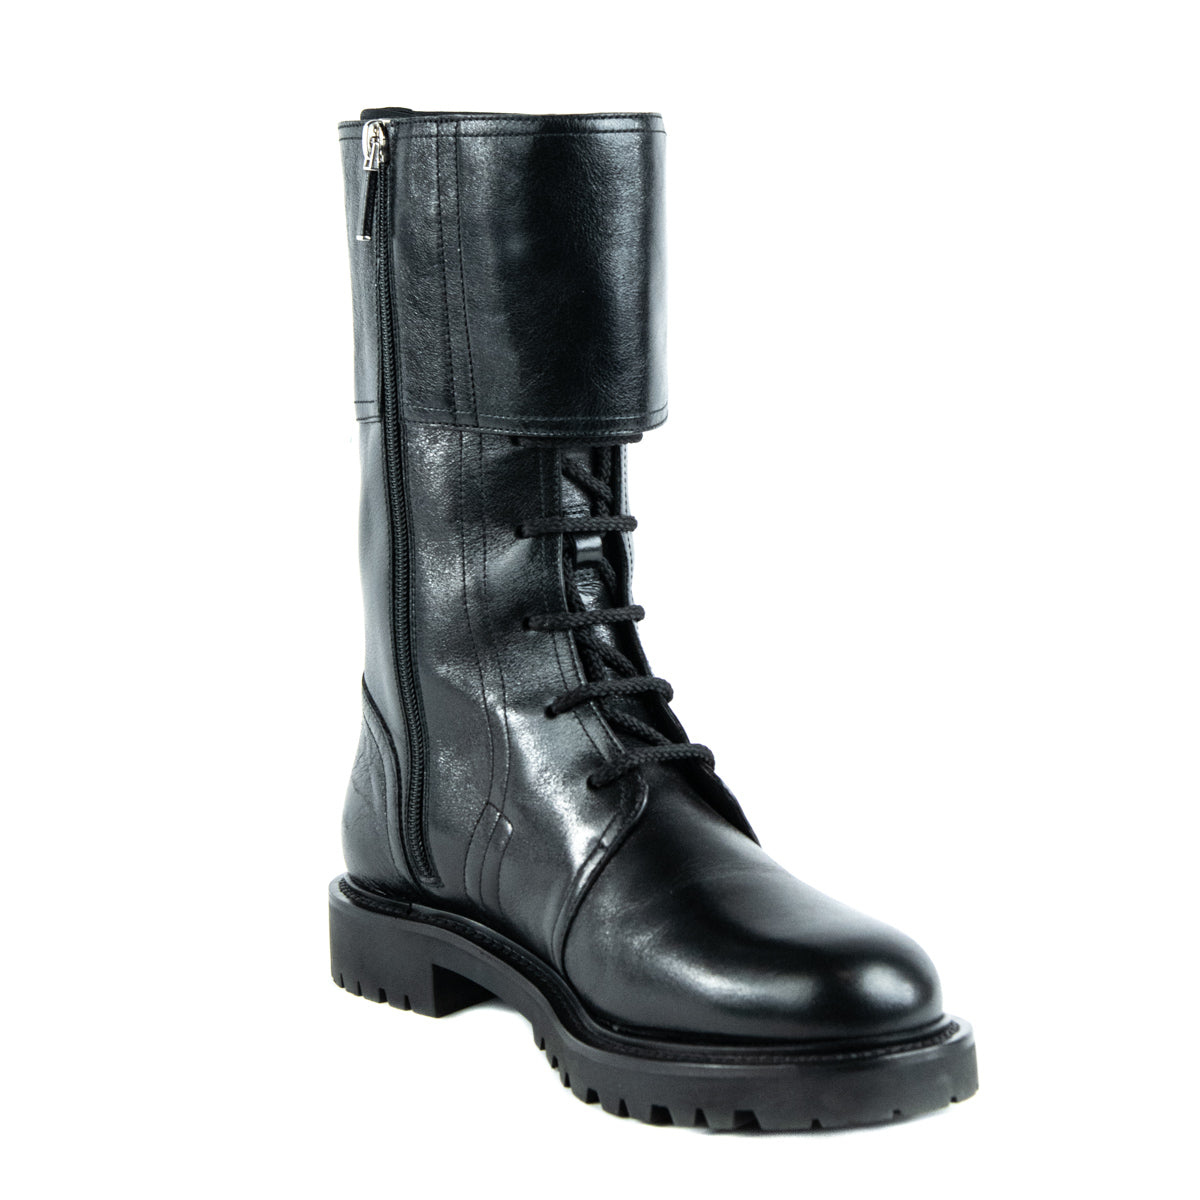 Leather boots Dior Black size 44 EU in Leather - 35604545